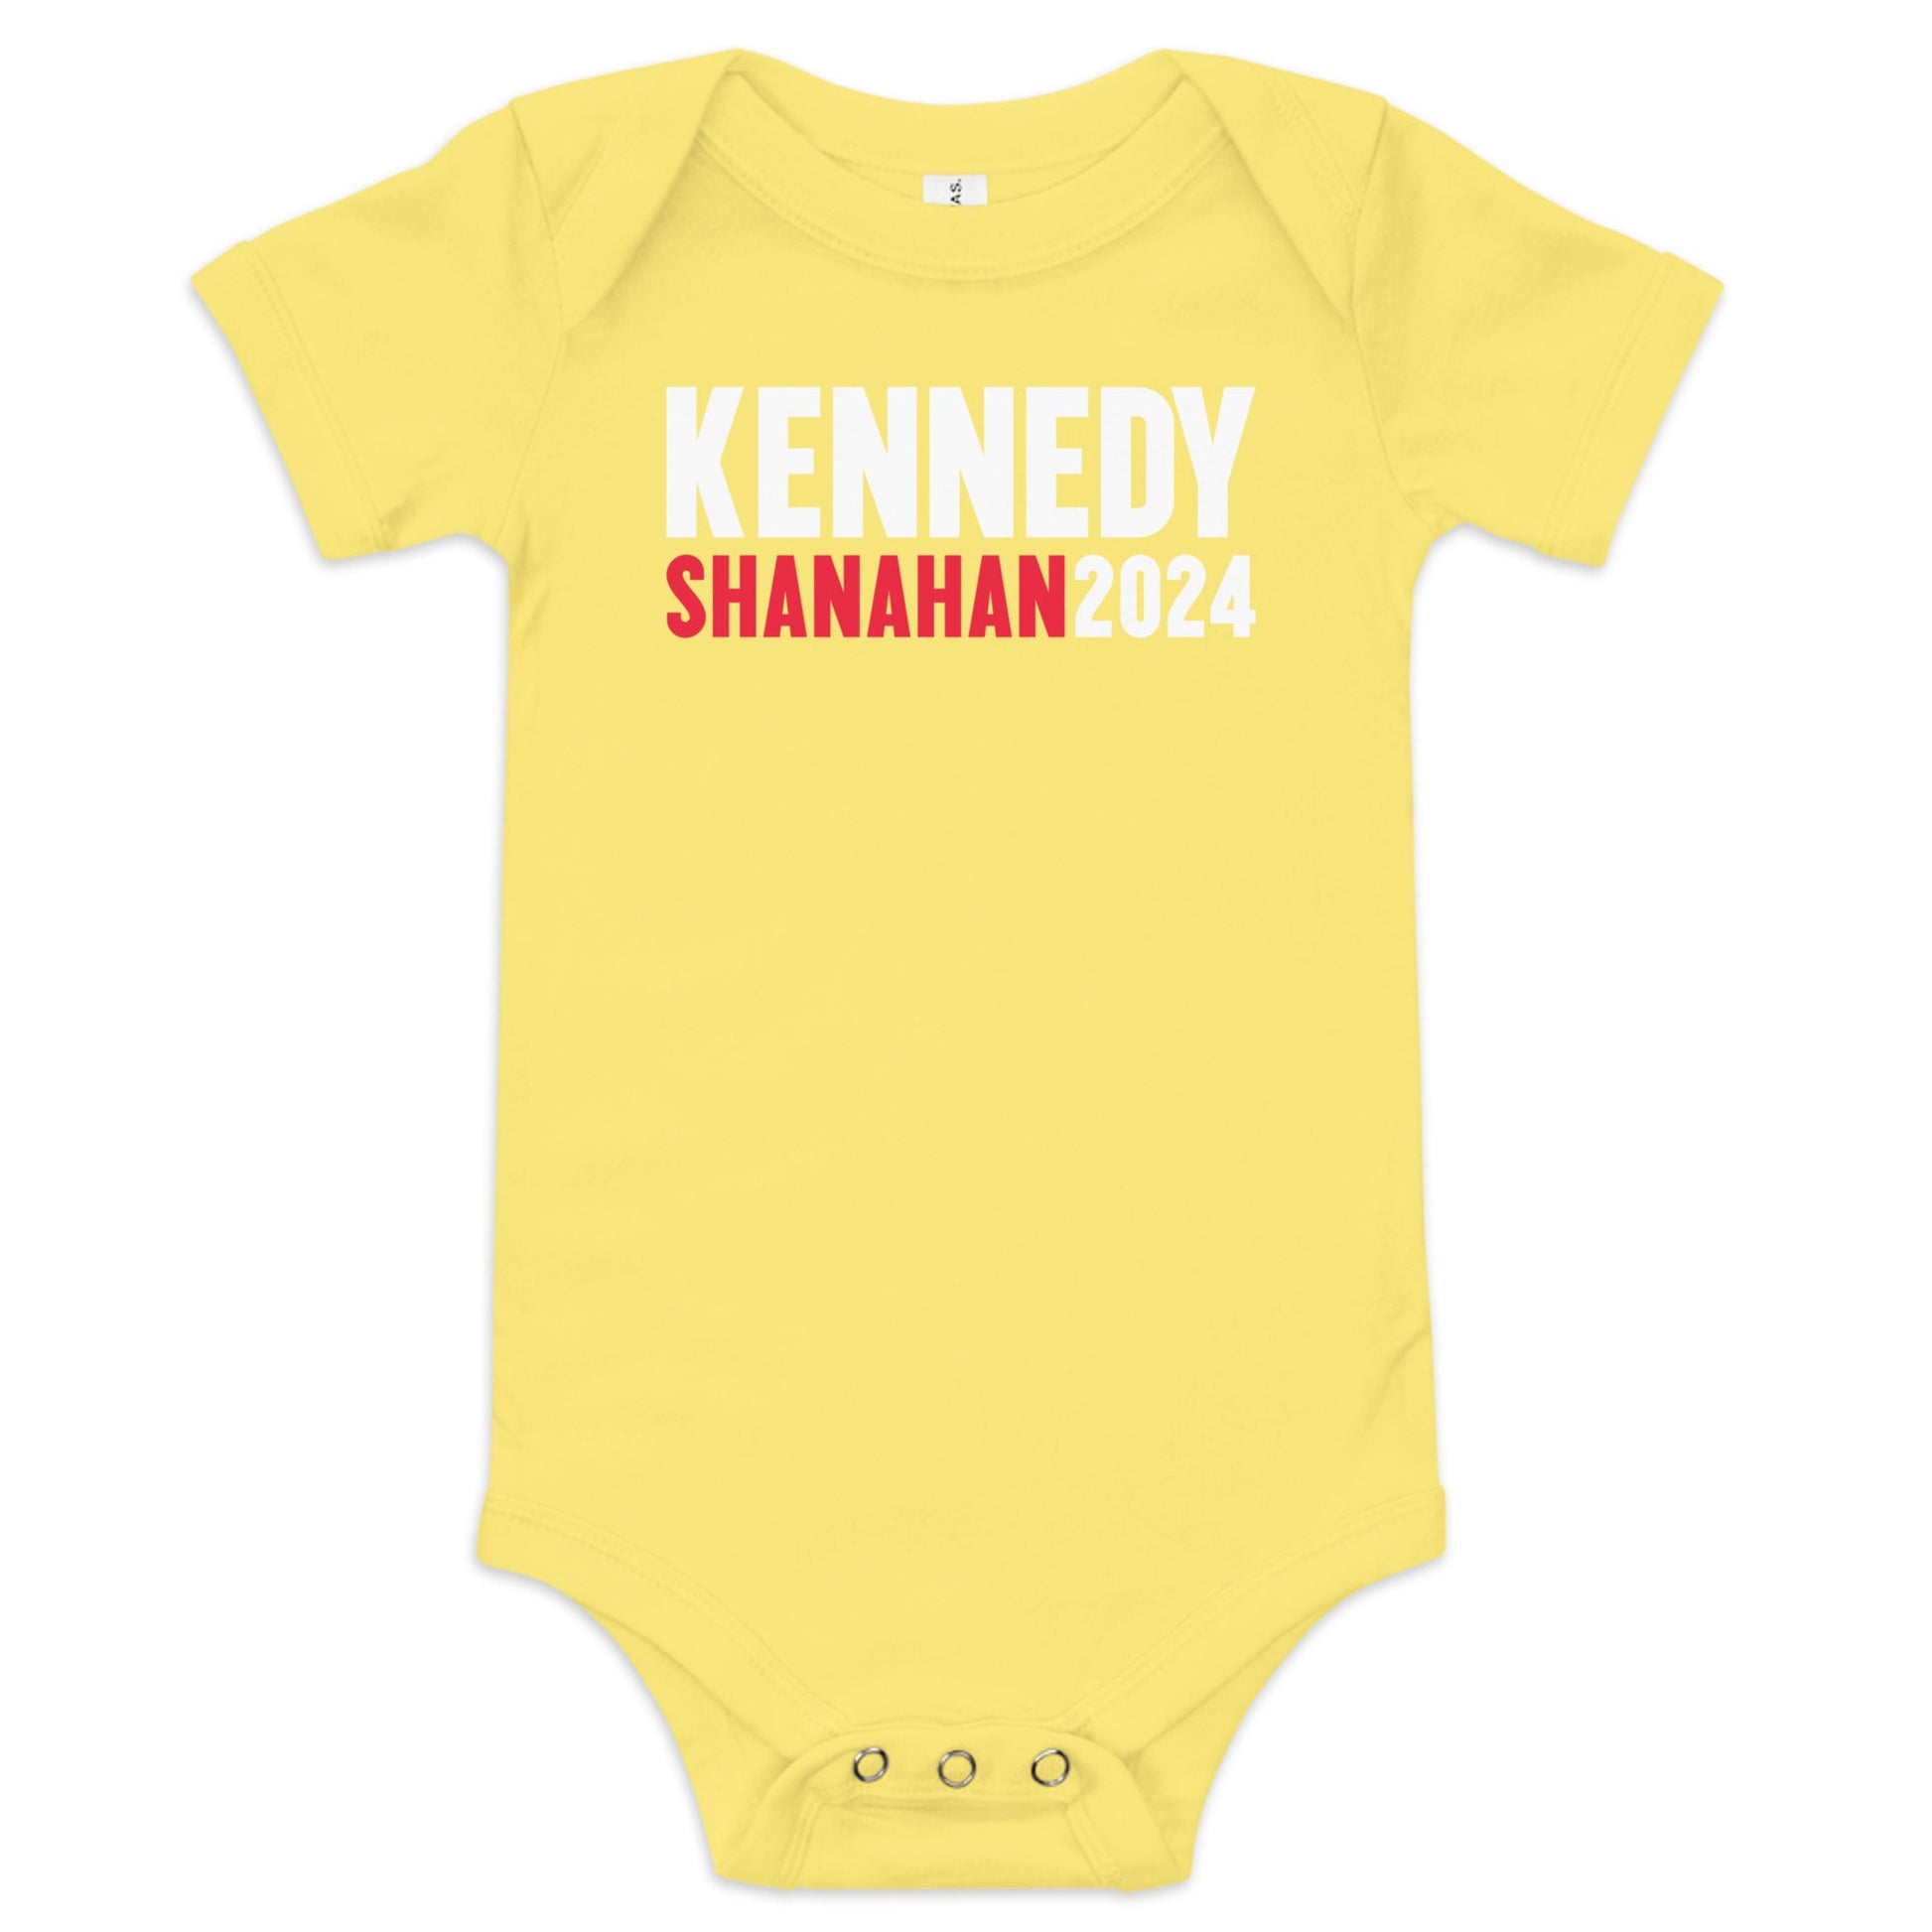 Kennedy Shanahan Baby Onesie - TEAM KENNEDY. All rights reserved